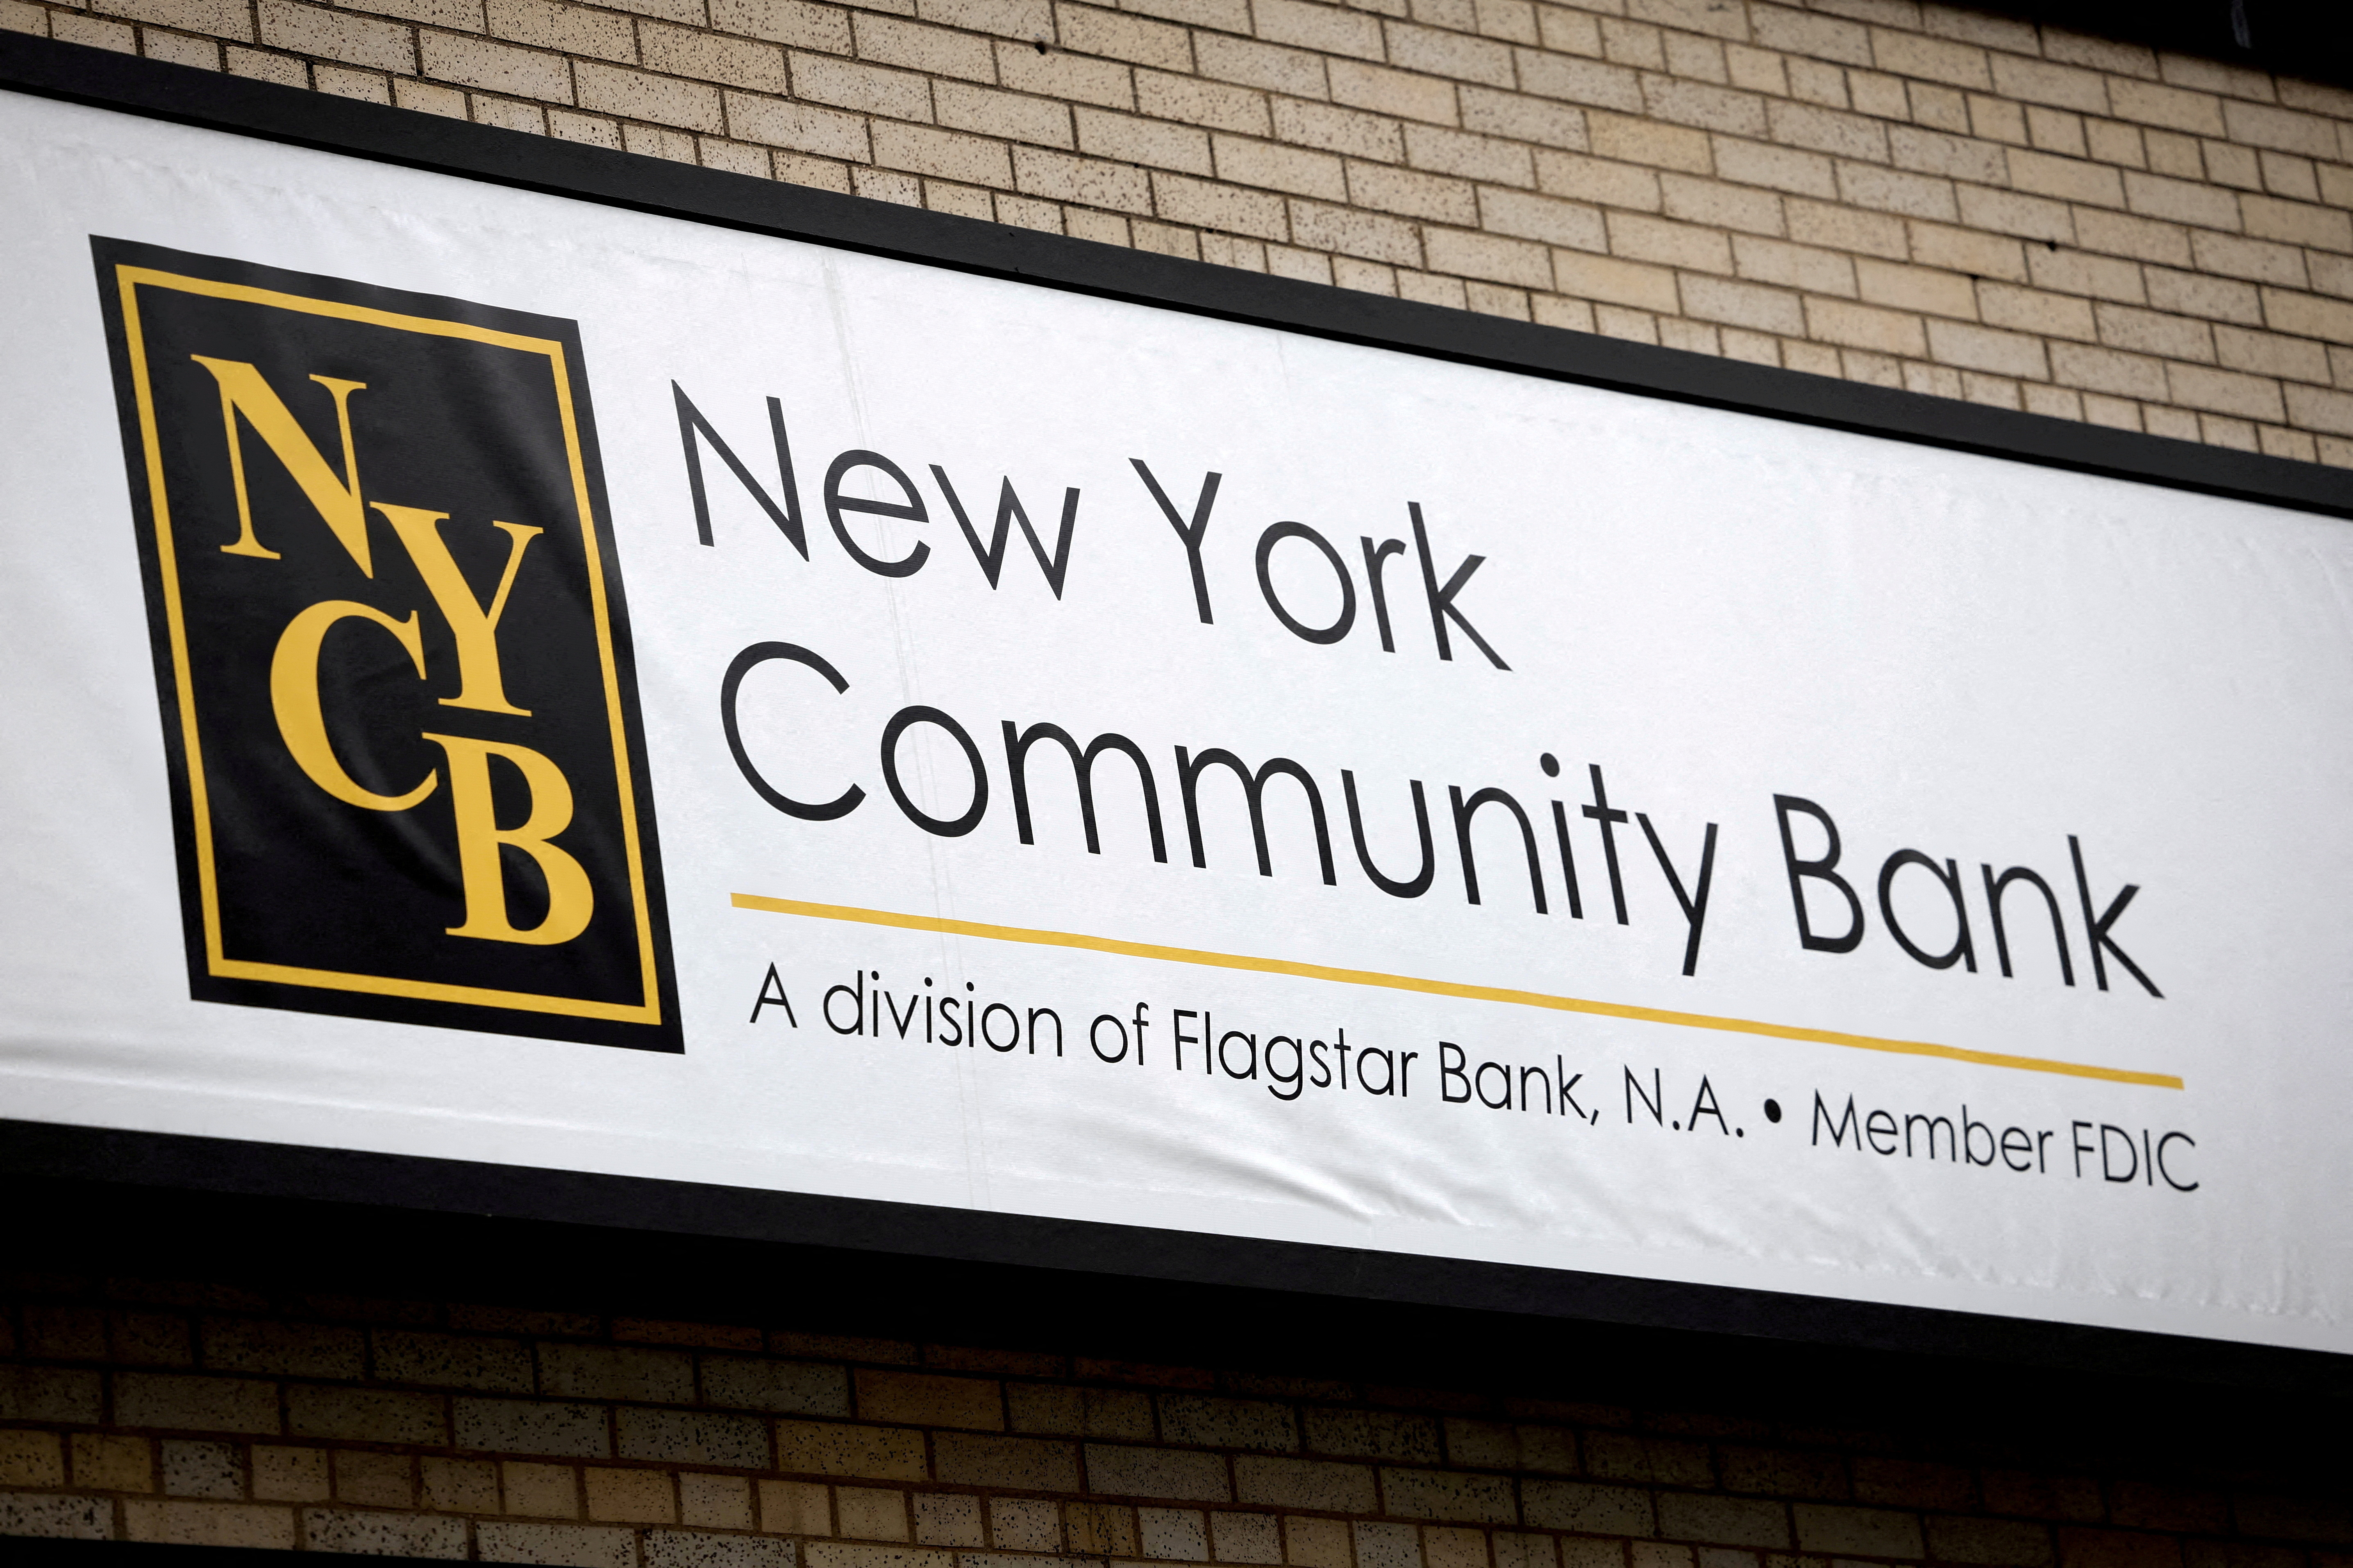 A Branch of New York Community Bank in Yonkers, New York